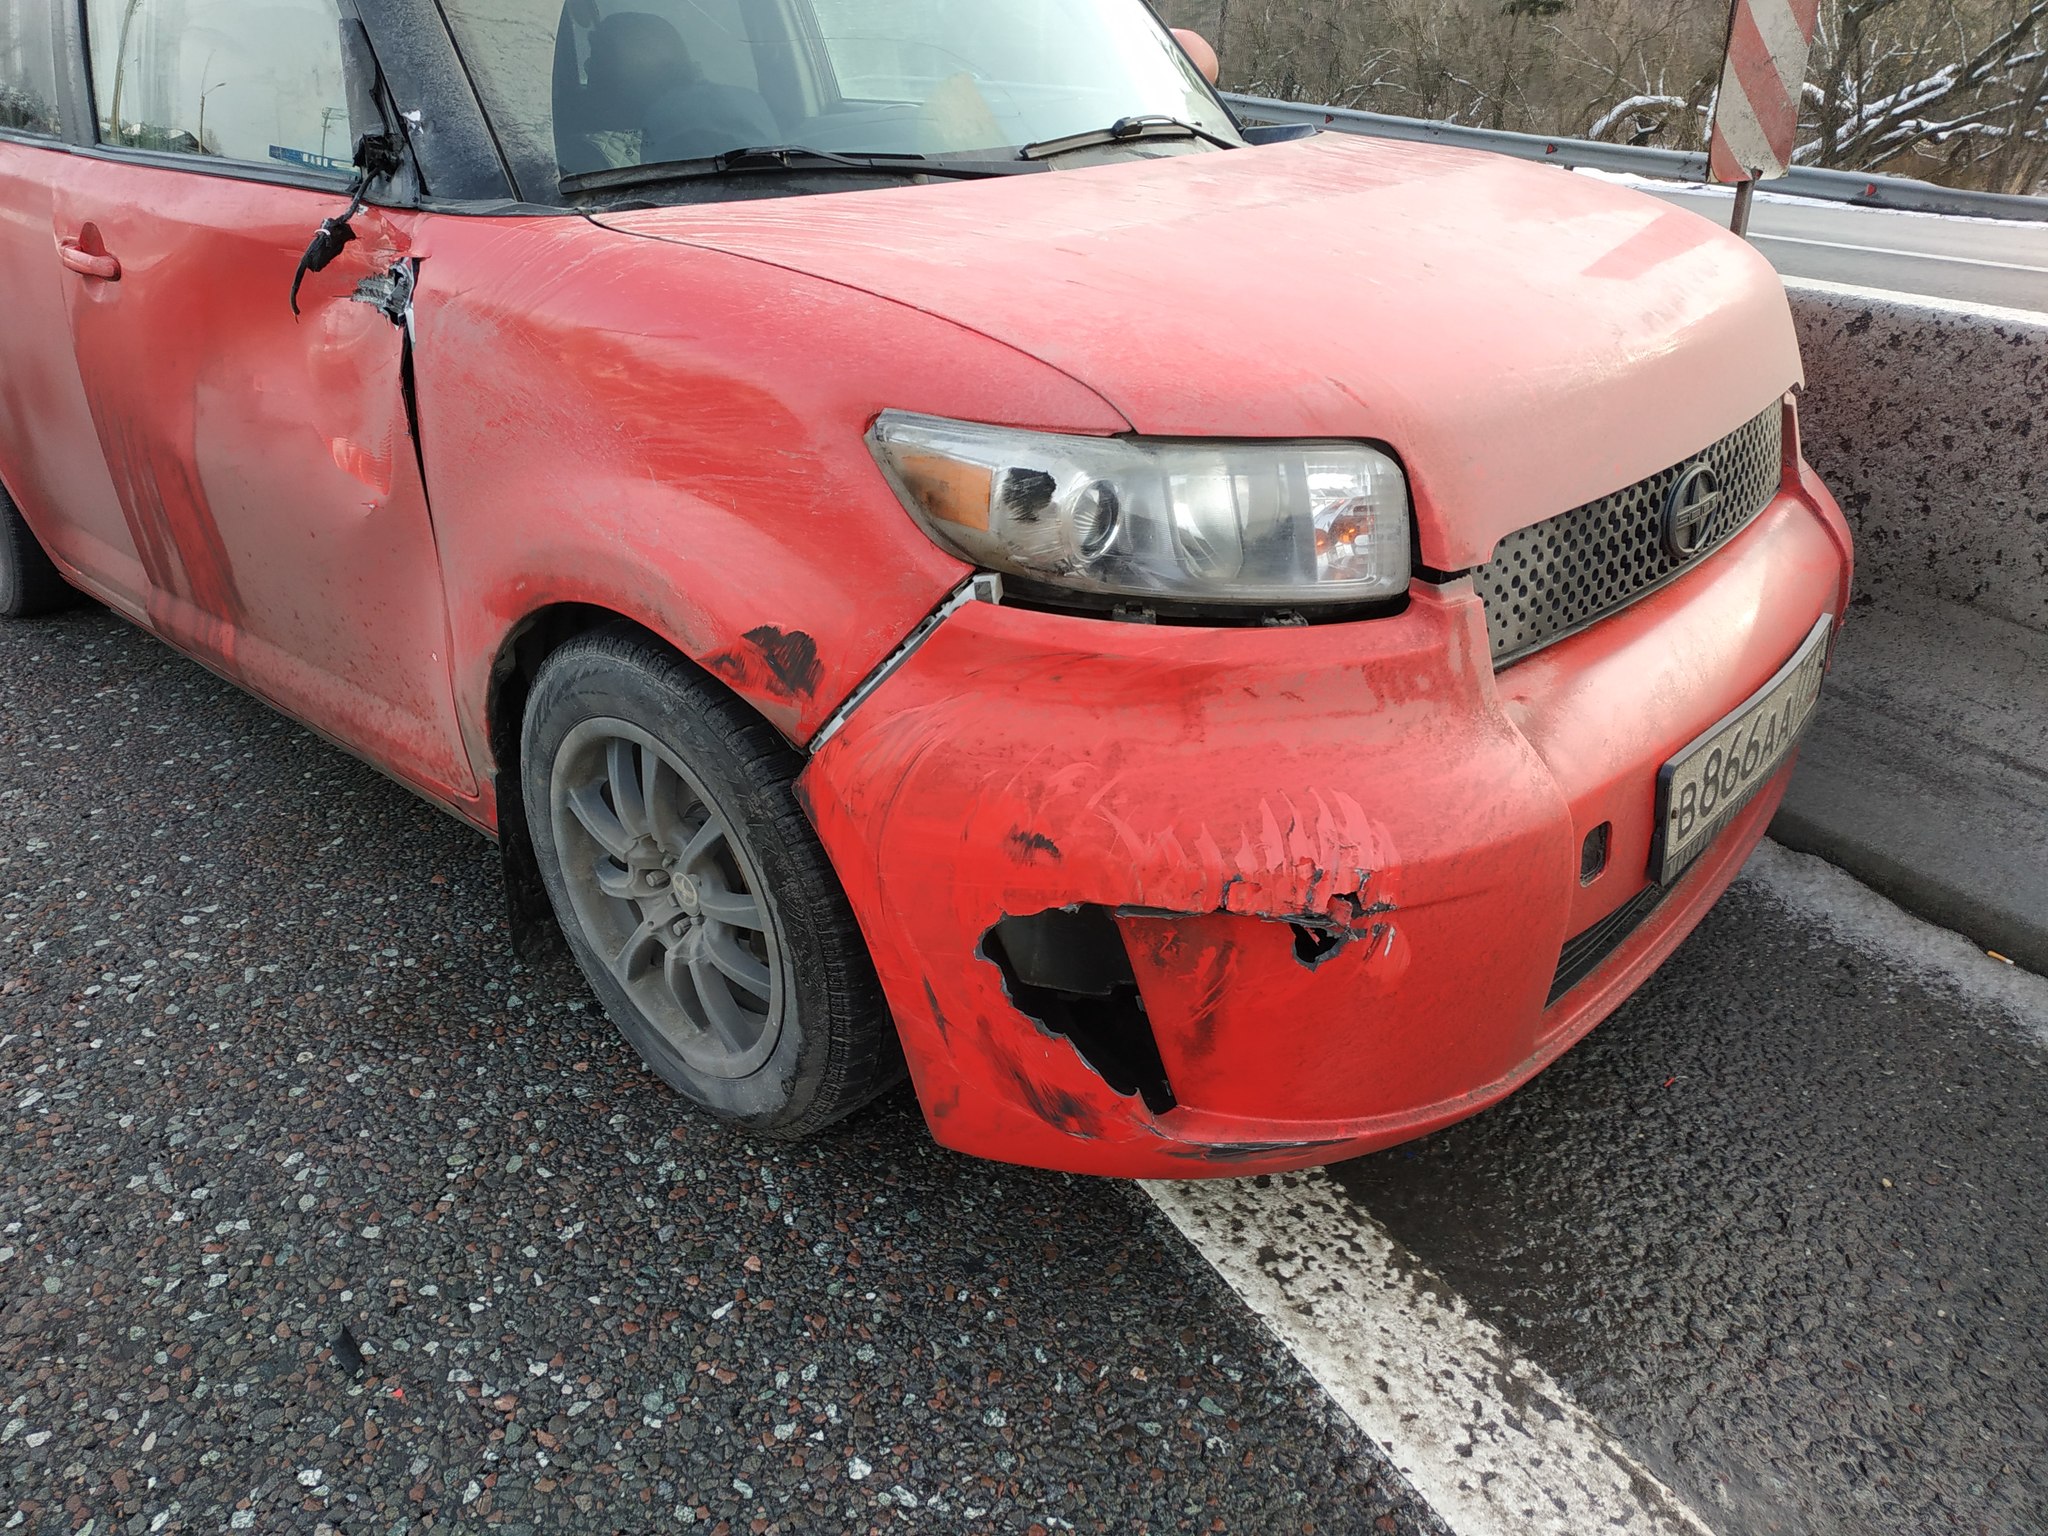 I got into an accident, I really need legal help or advice - My, No rating, Road accident, Longpost